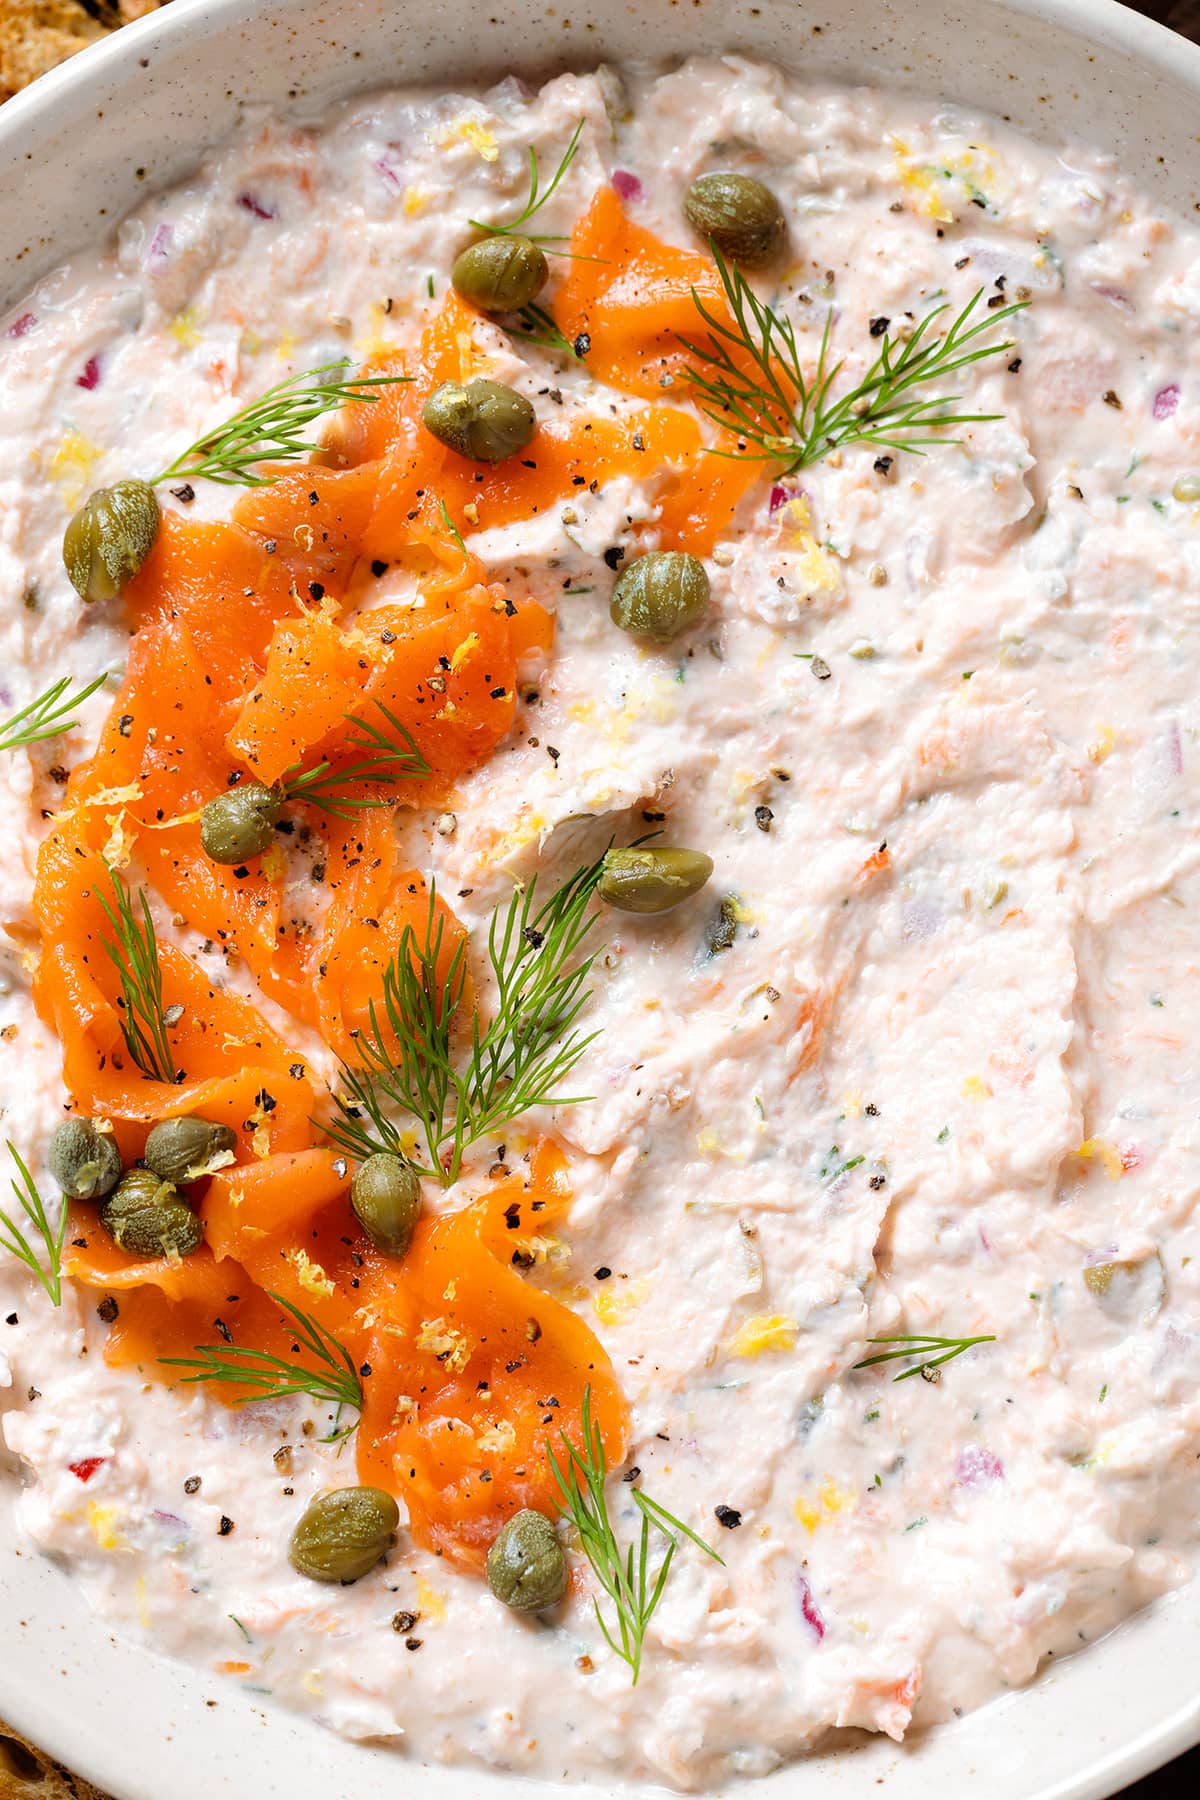 Smoked salmon dip garnished with more smoked salmon, capers, and fresh dill in a white bowl.